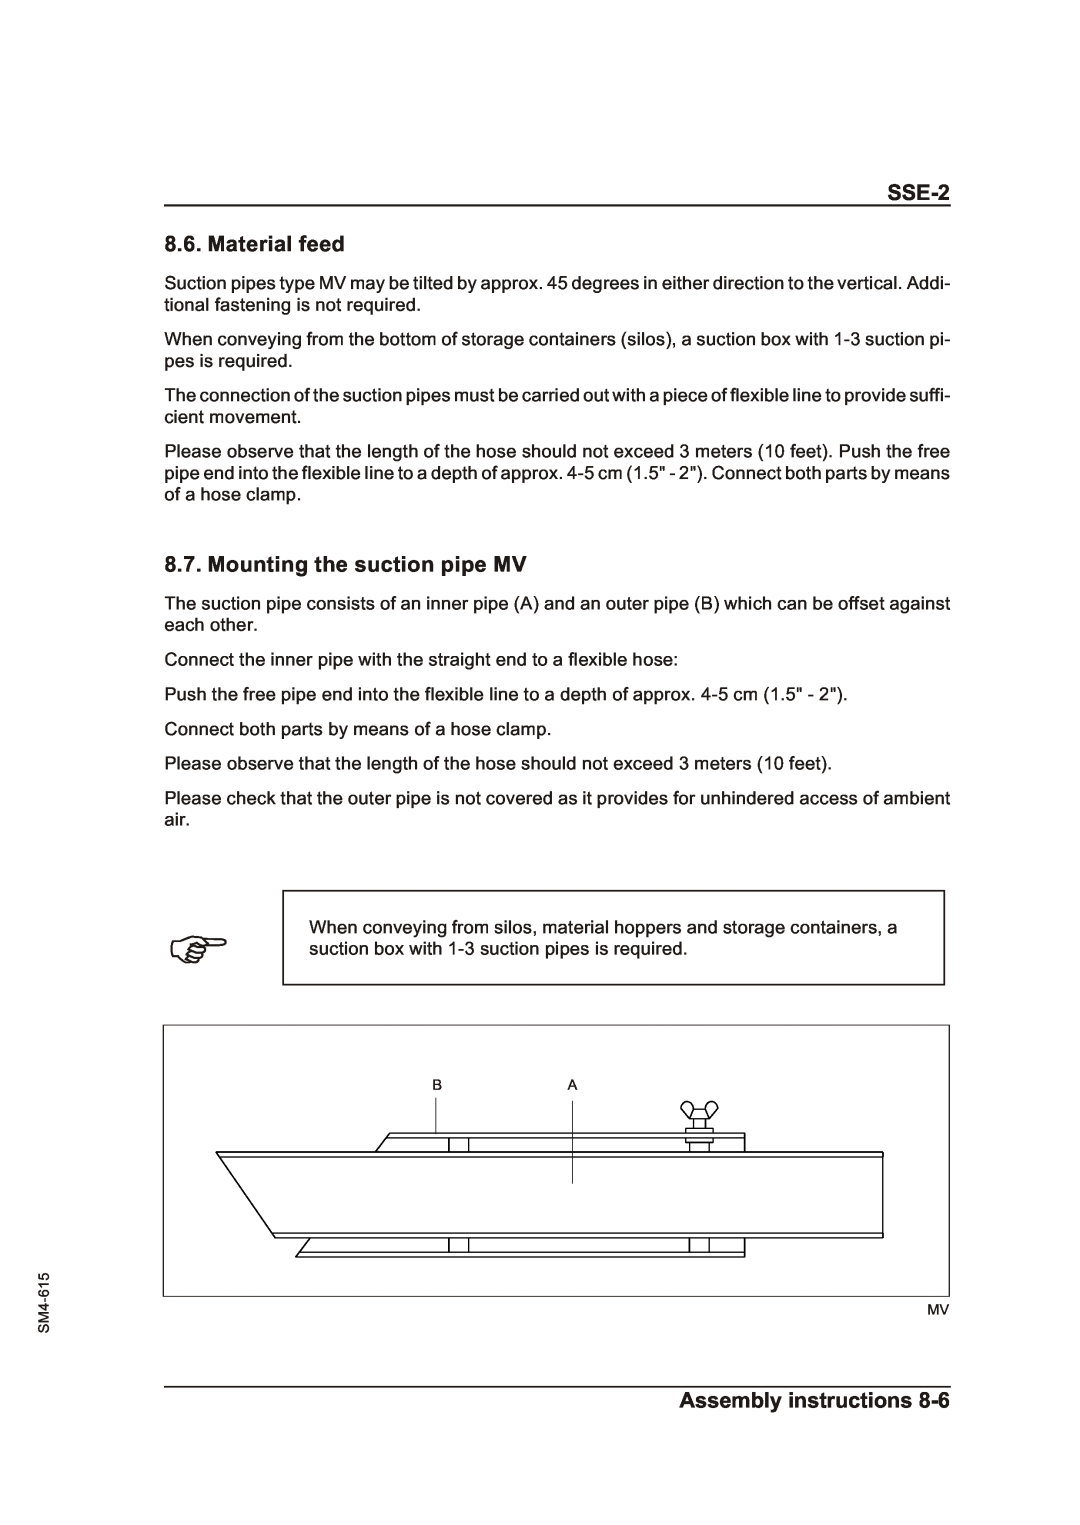 Sterling operating instructions SSE-2 8.6. Material feed, Mounting the suction pipe MV, Assembly instructions 